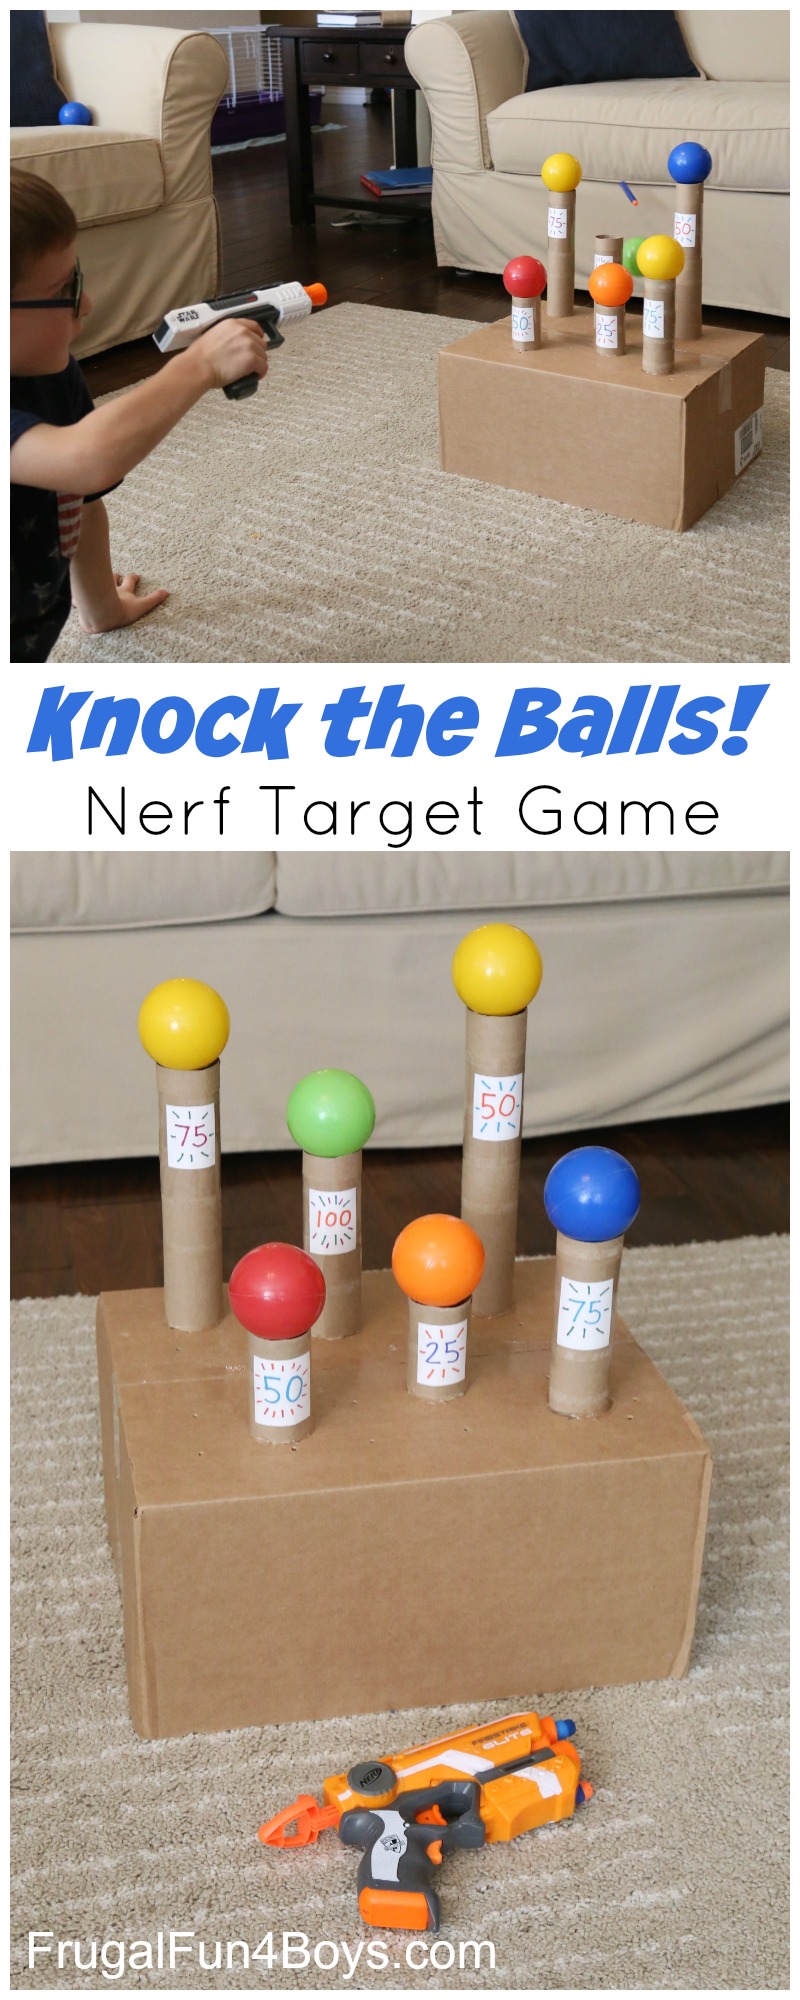 Knock the Balls Down! Nerf Target Game